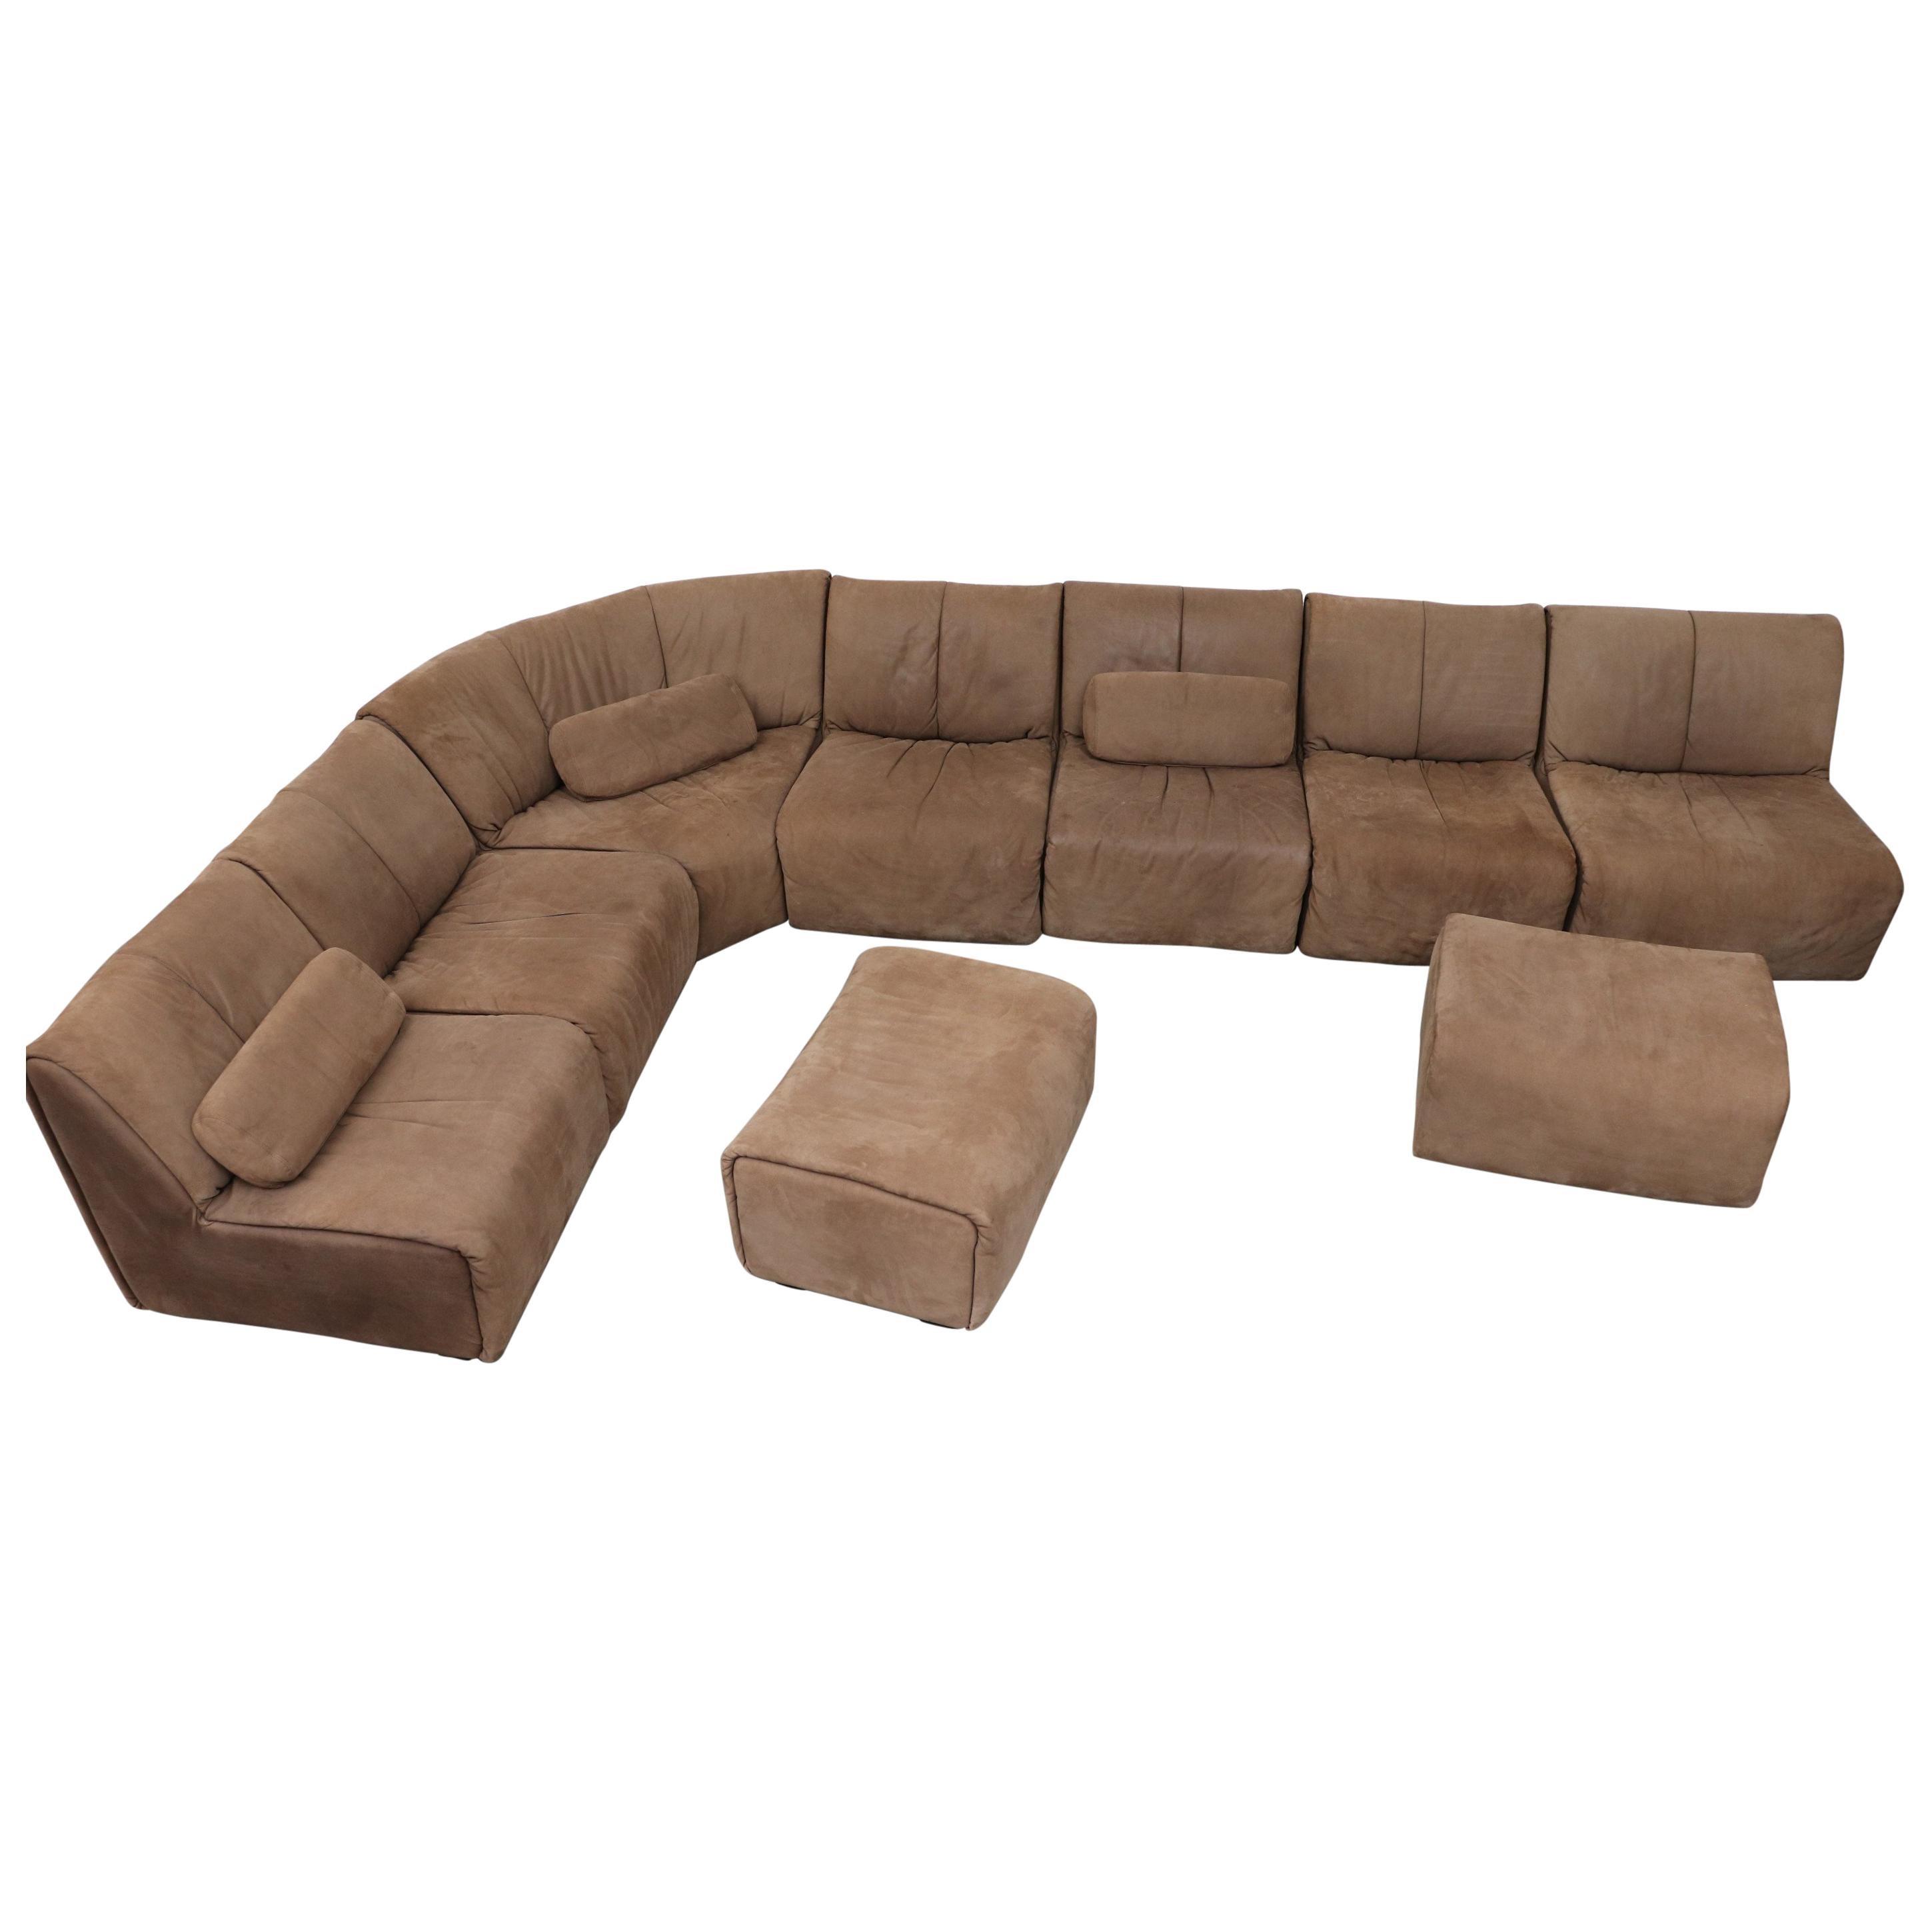 Large COR Leather Modular Sectional Sofa with 2 Ottomans